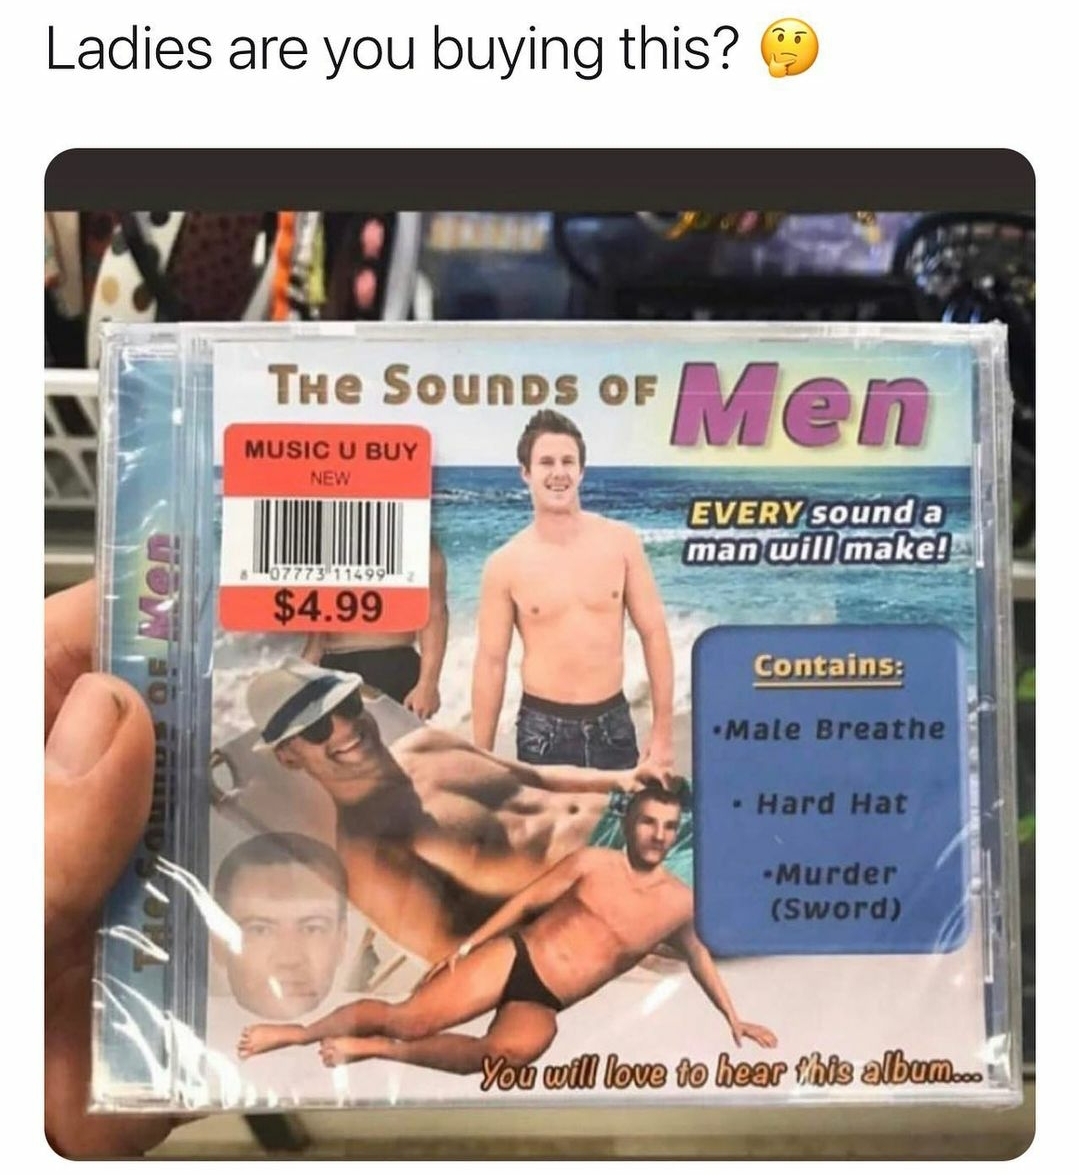 muscle - Ladies are you buying this? Men New The SounDS Of Music U Buy Every sound a man will make! $4.99 Contains Male Breathe Hard Hat Murder Sword You will love to heer bls album...